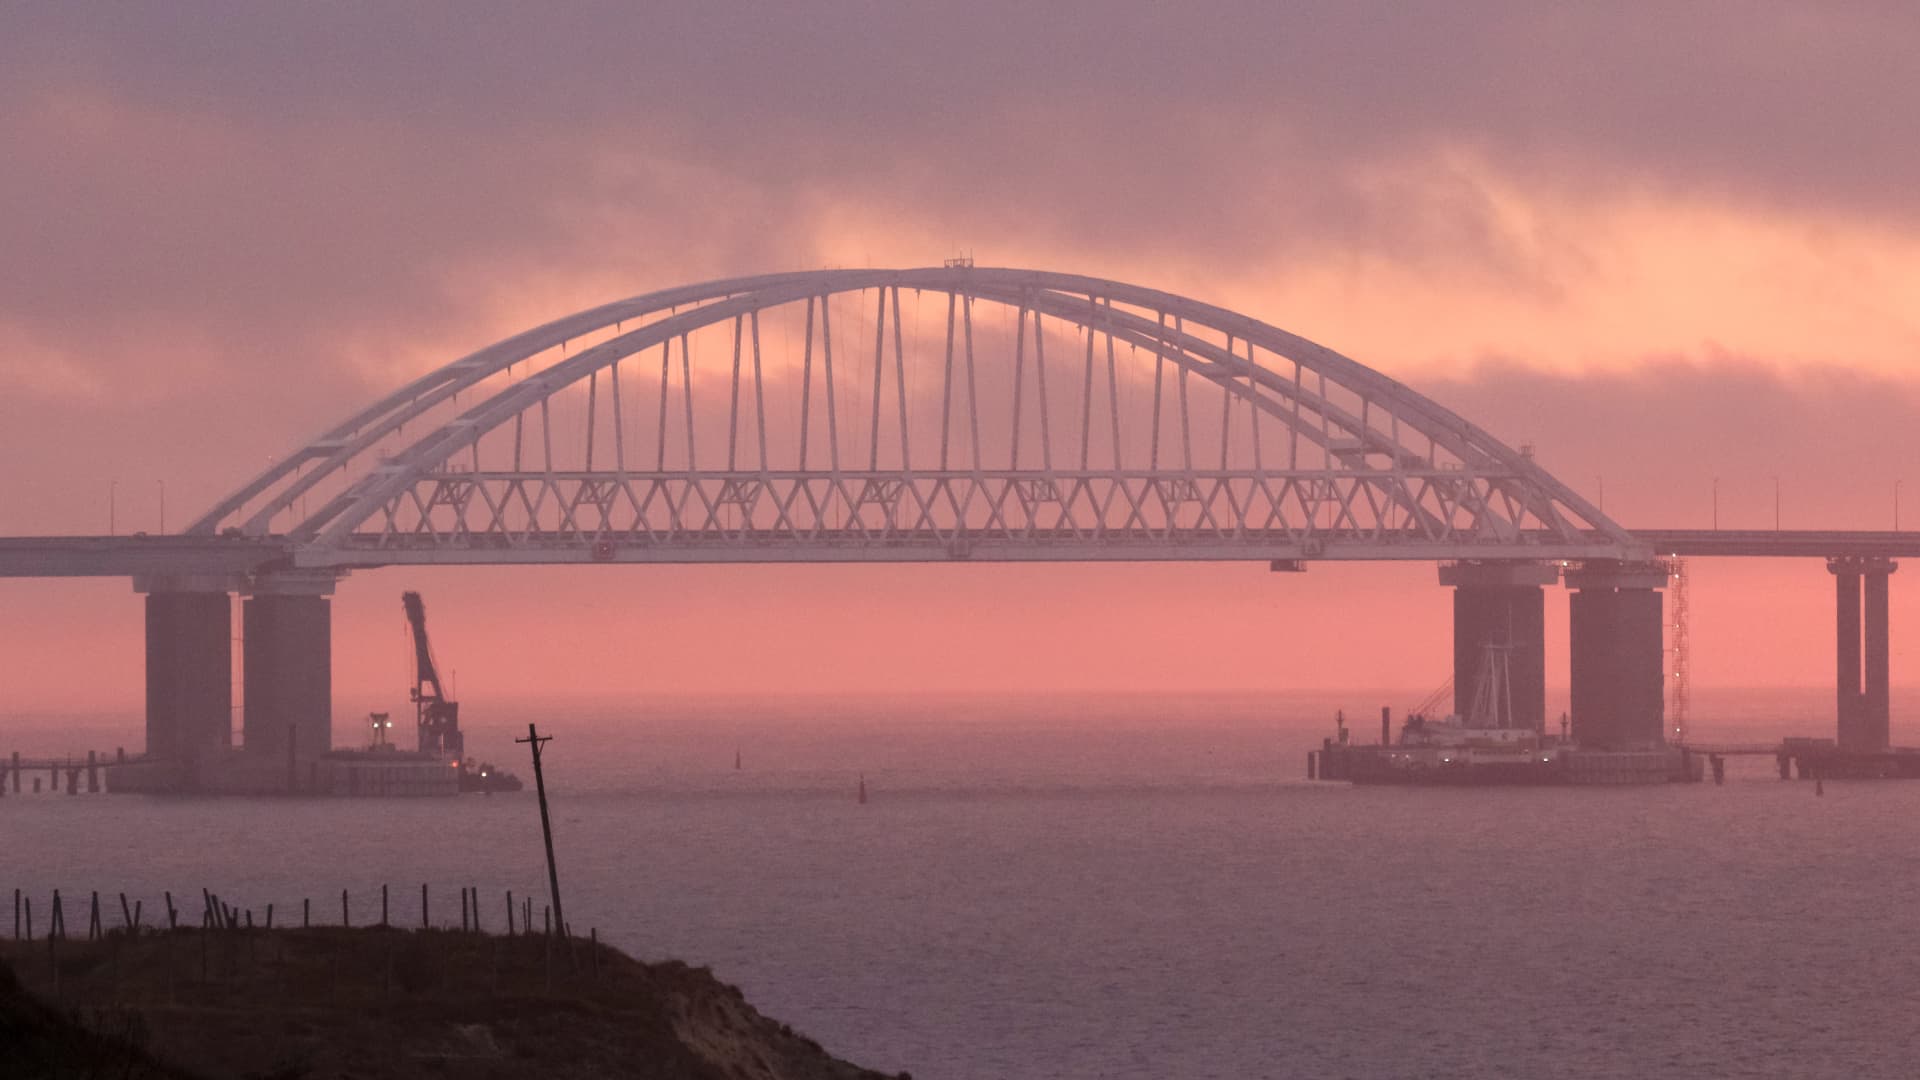 A general view shows a road-and-rail bridge, which is constructed to connect the Russian mainland with the Crimean peninsula, at sunrise in the Kerch Strait, Crimea November 26, 2018.